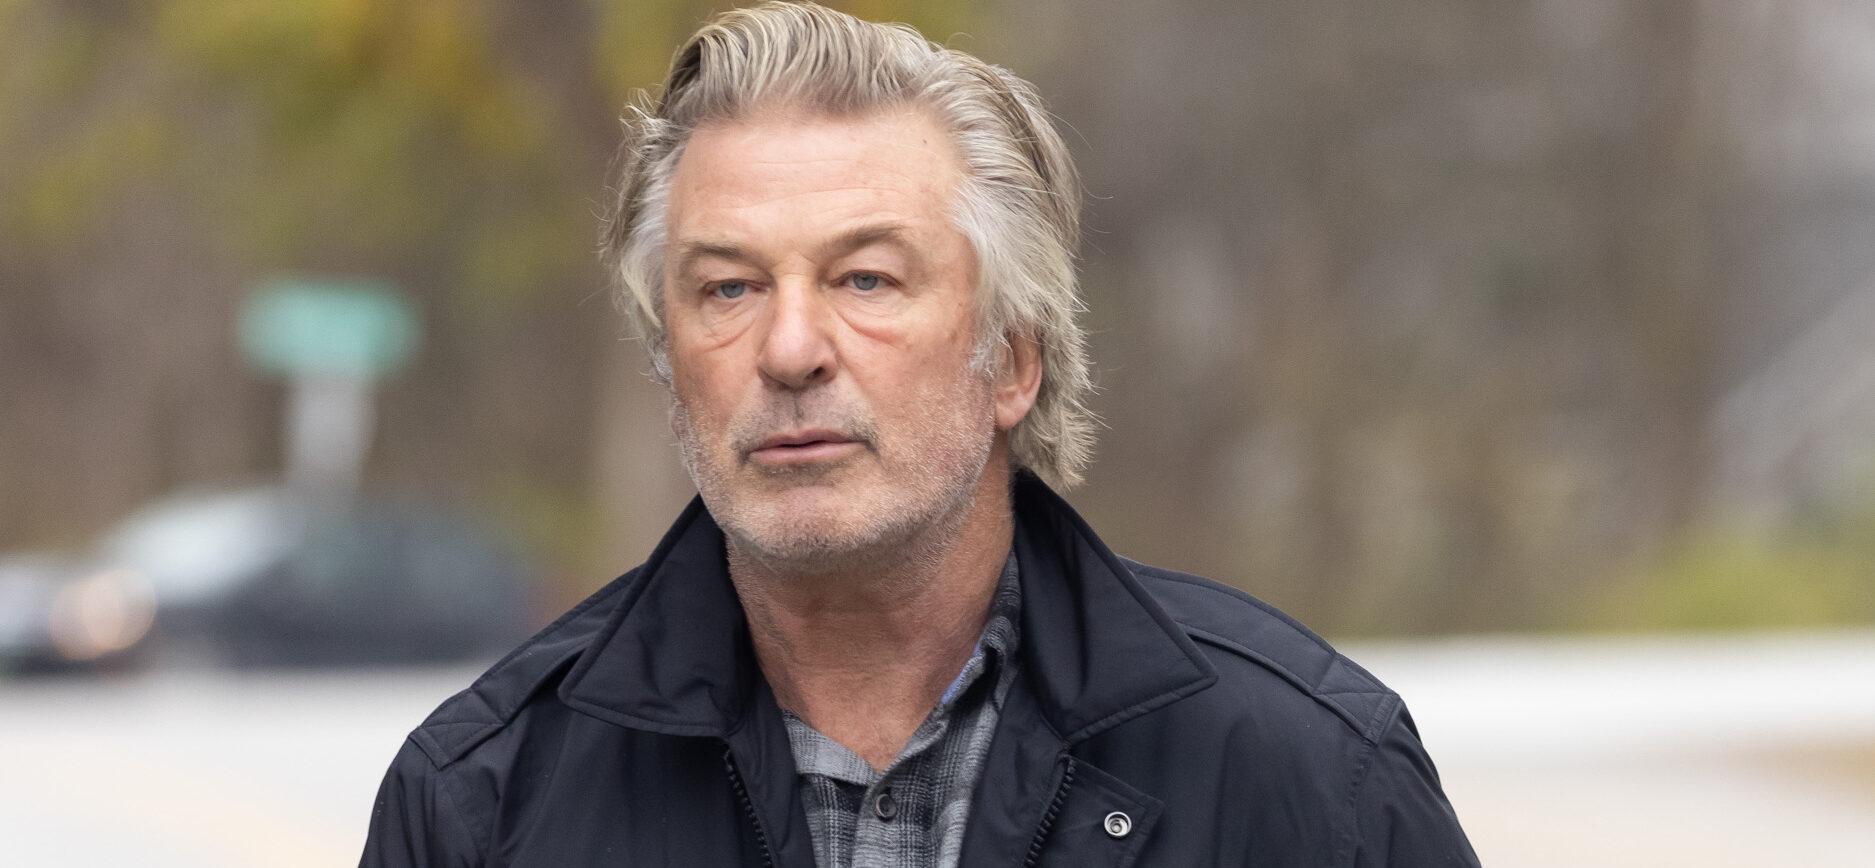 ‘Rust’ Armorer’s Lawyers Put Blame On Alec Baldwin During Trial Opening Statements